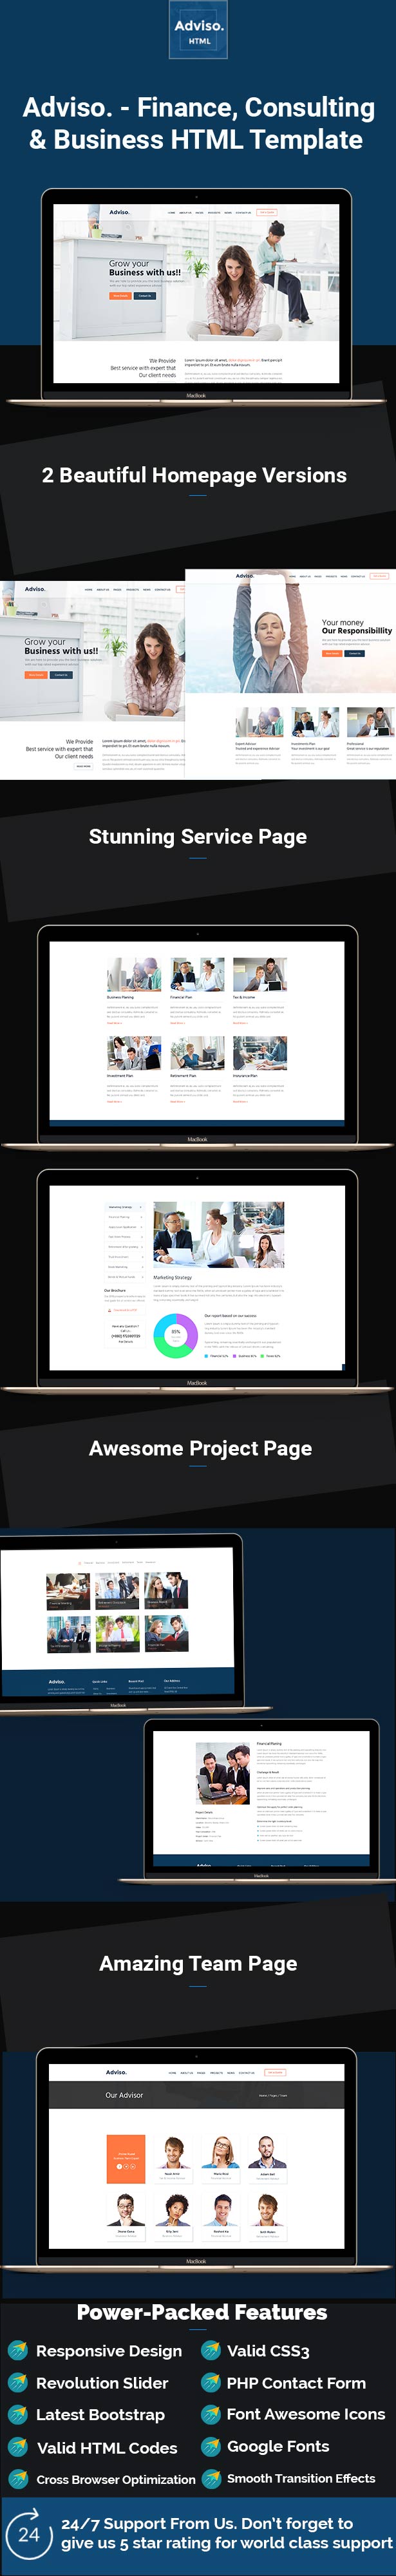 Adviso - Finance, Consulting, Business HTML Template